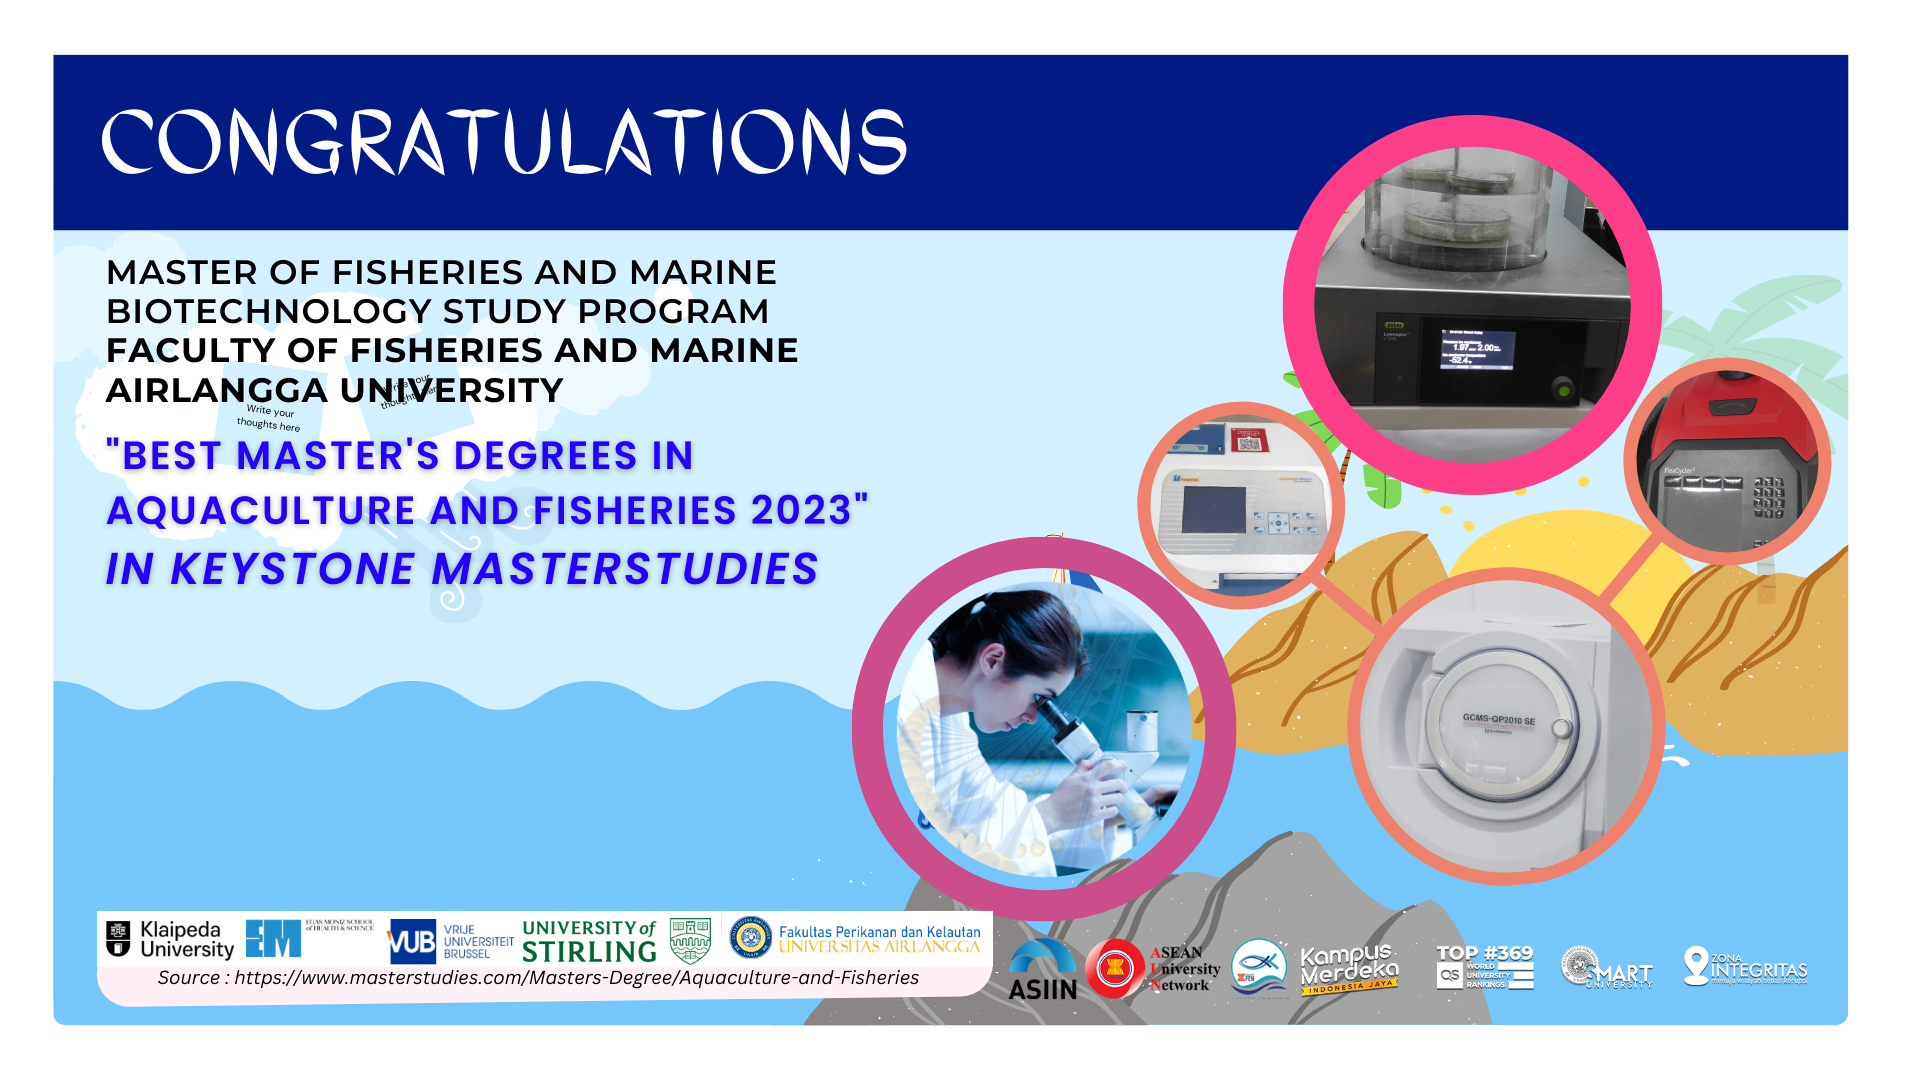 “Best master’s degrees in aquaculture and fisheries 2023”  in KEYSTONE MASTERSTUDIES